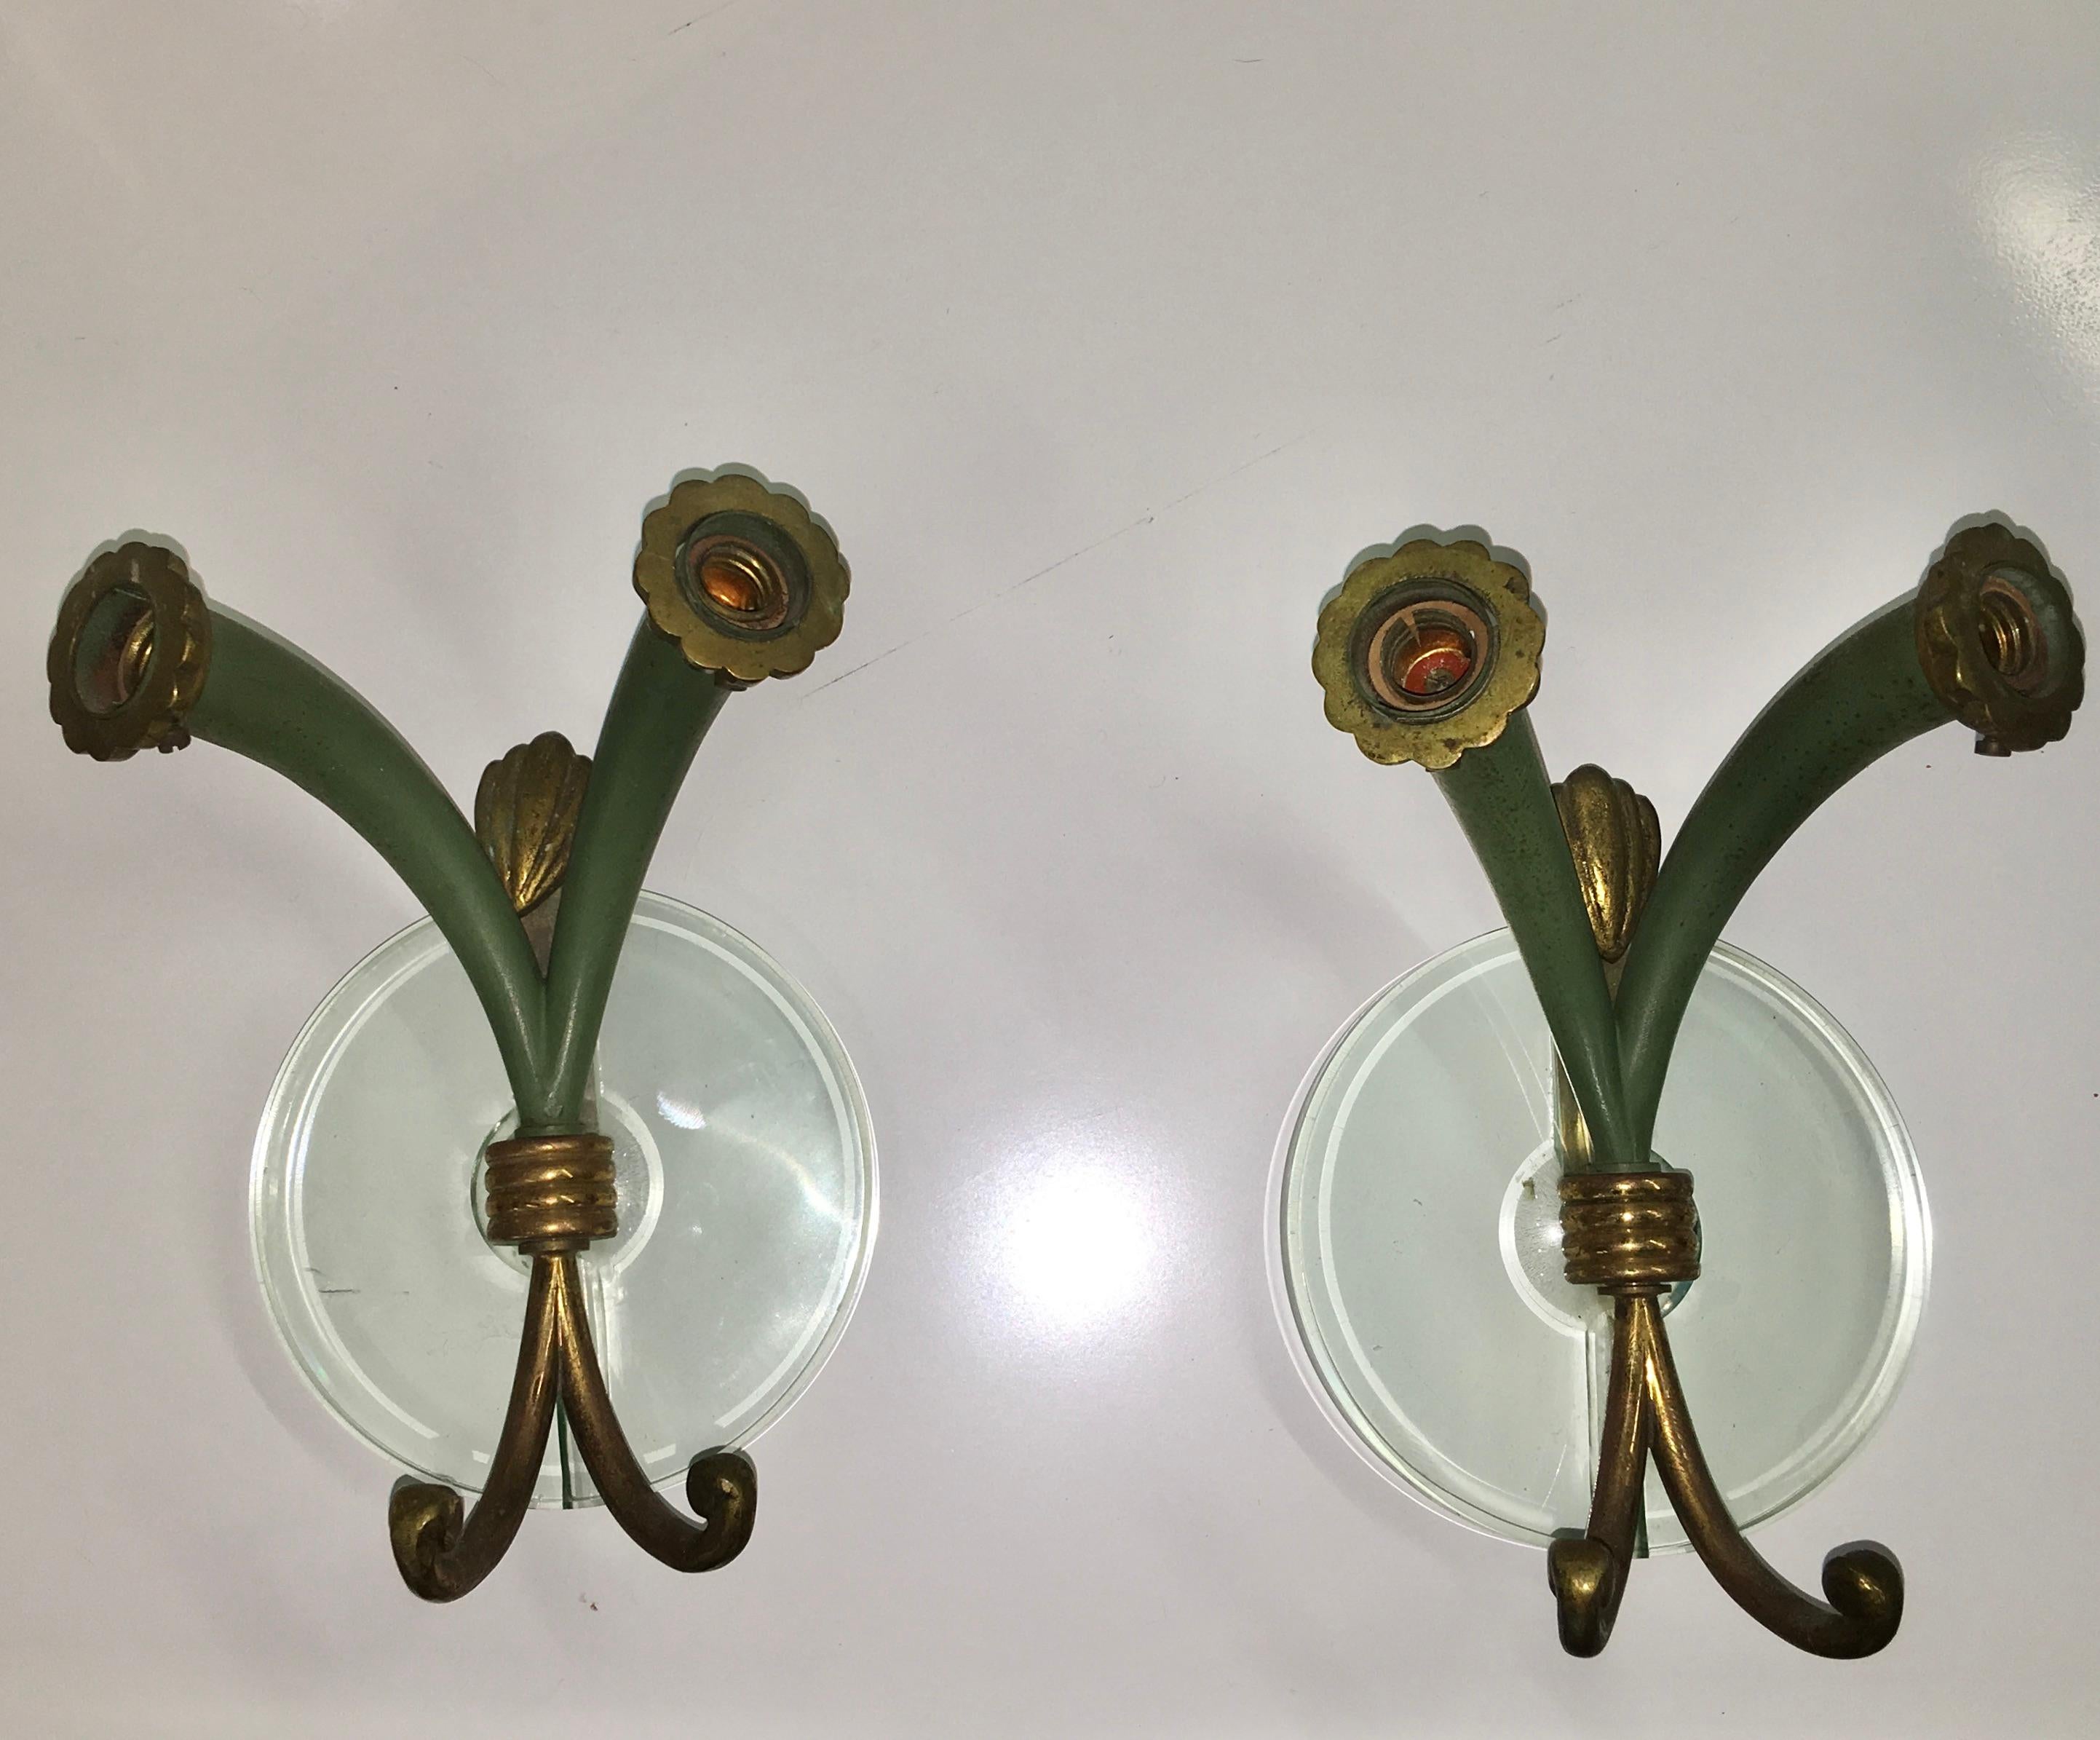 Elegant and diminutive pair of wall lights which appear also to double as coat hooks!
Tapered cast bronze cornucopia shaped trumpet cones in original green enamel with scalloped bronze collars around two candelabra size lightbulb sockets.
Mounted